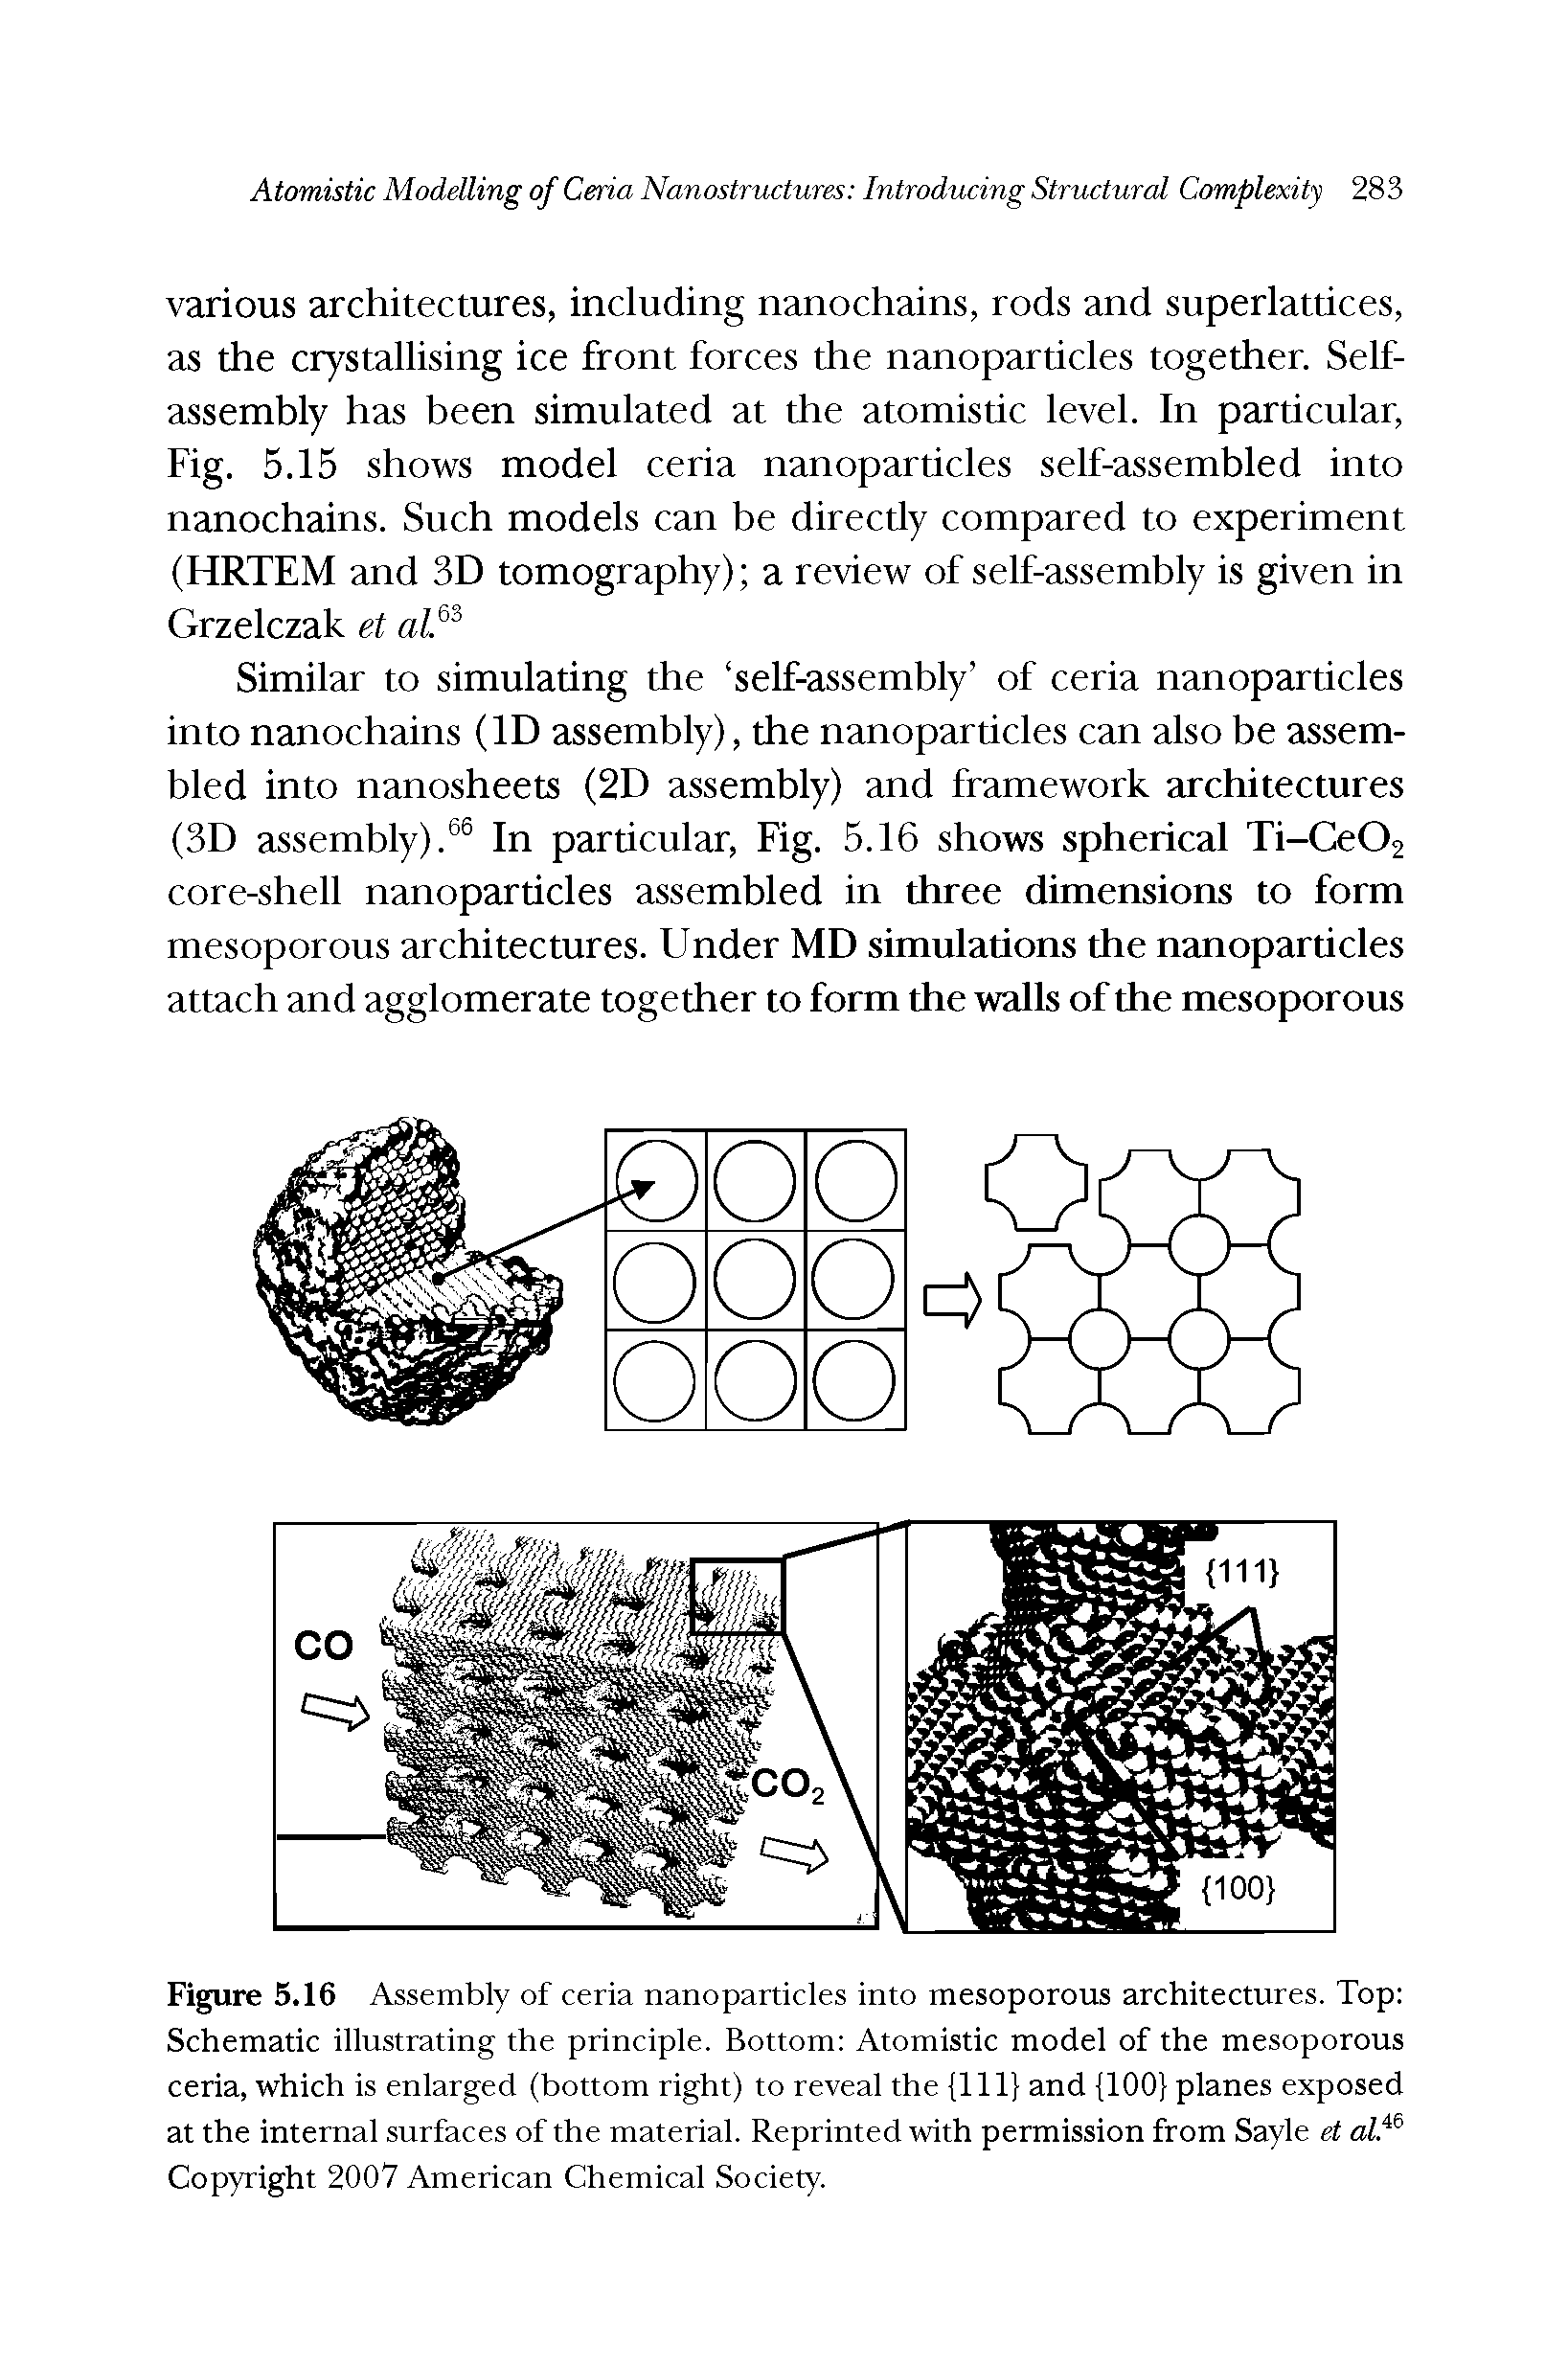 Figure 5.16 Assembly of ceria nanoparticles into mesoporous architectures. Top Schematic illustrating the principle. Bottom Atomistic model of the mesoporous ceria, which is enlarged (bottom right) to reveal the 111 and 100 planes exposed at the internal surfaces of the material. Reprinted with permission from Sayle et Copyright 2007 American Chemical Society.